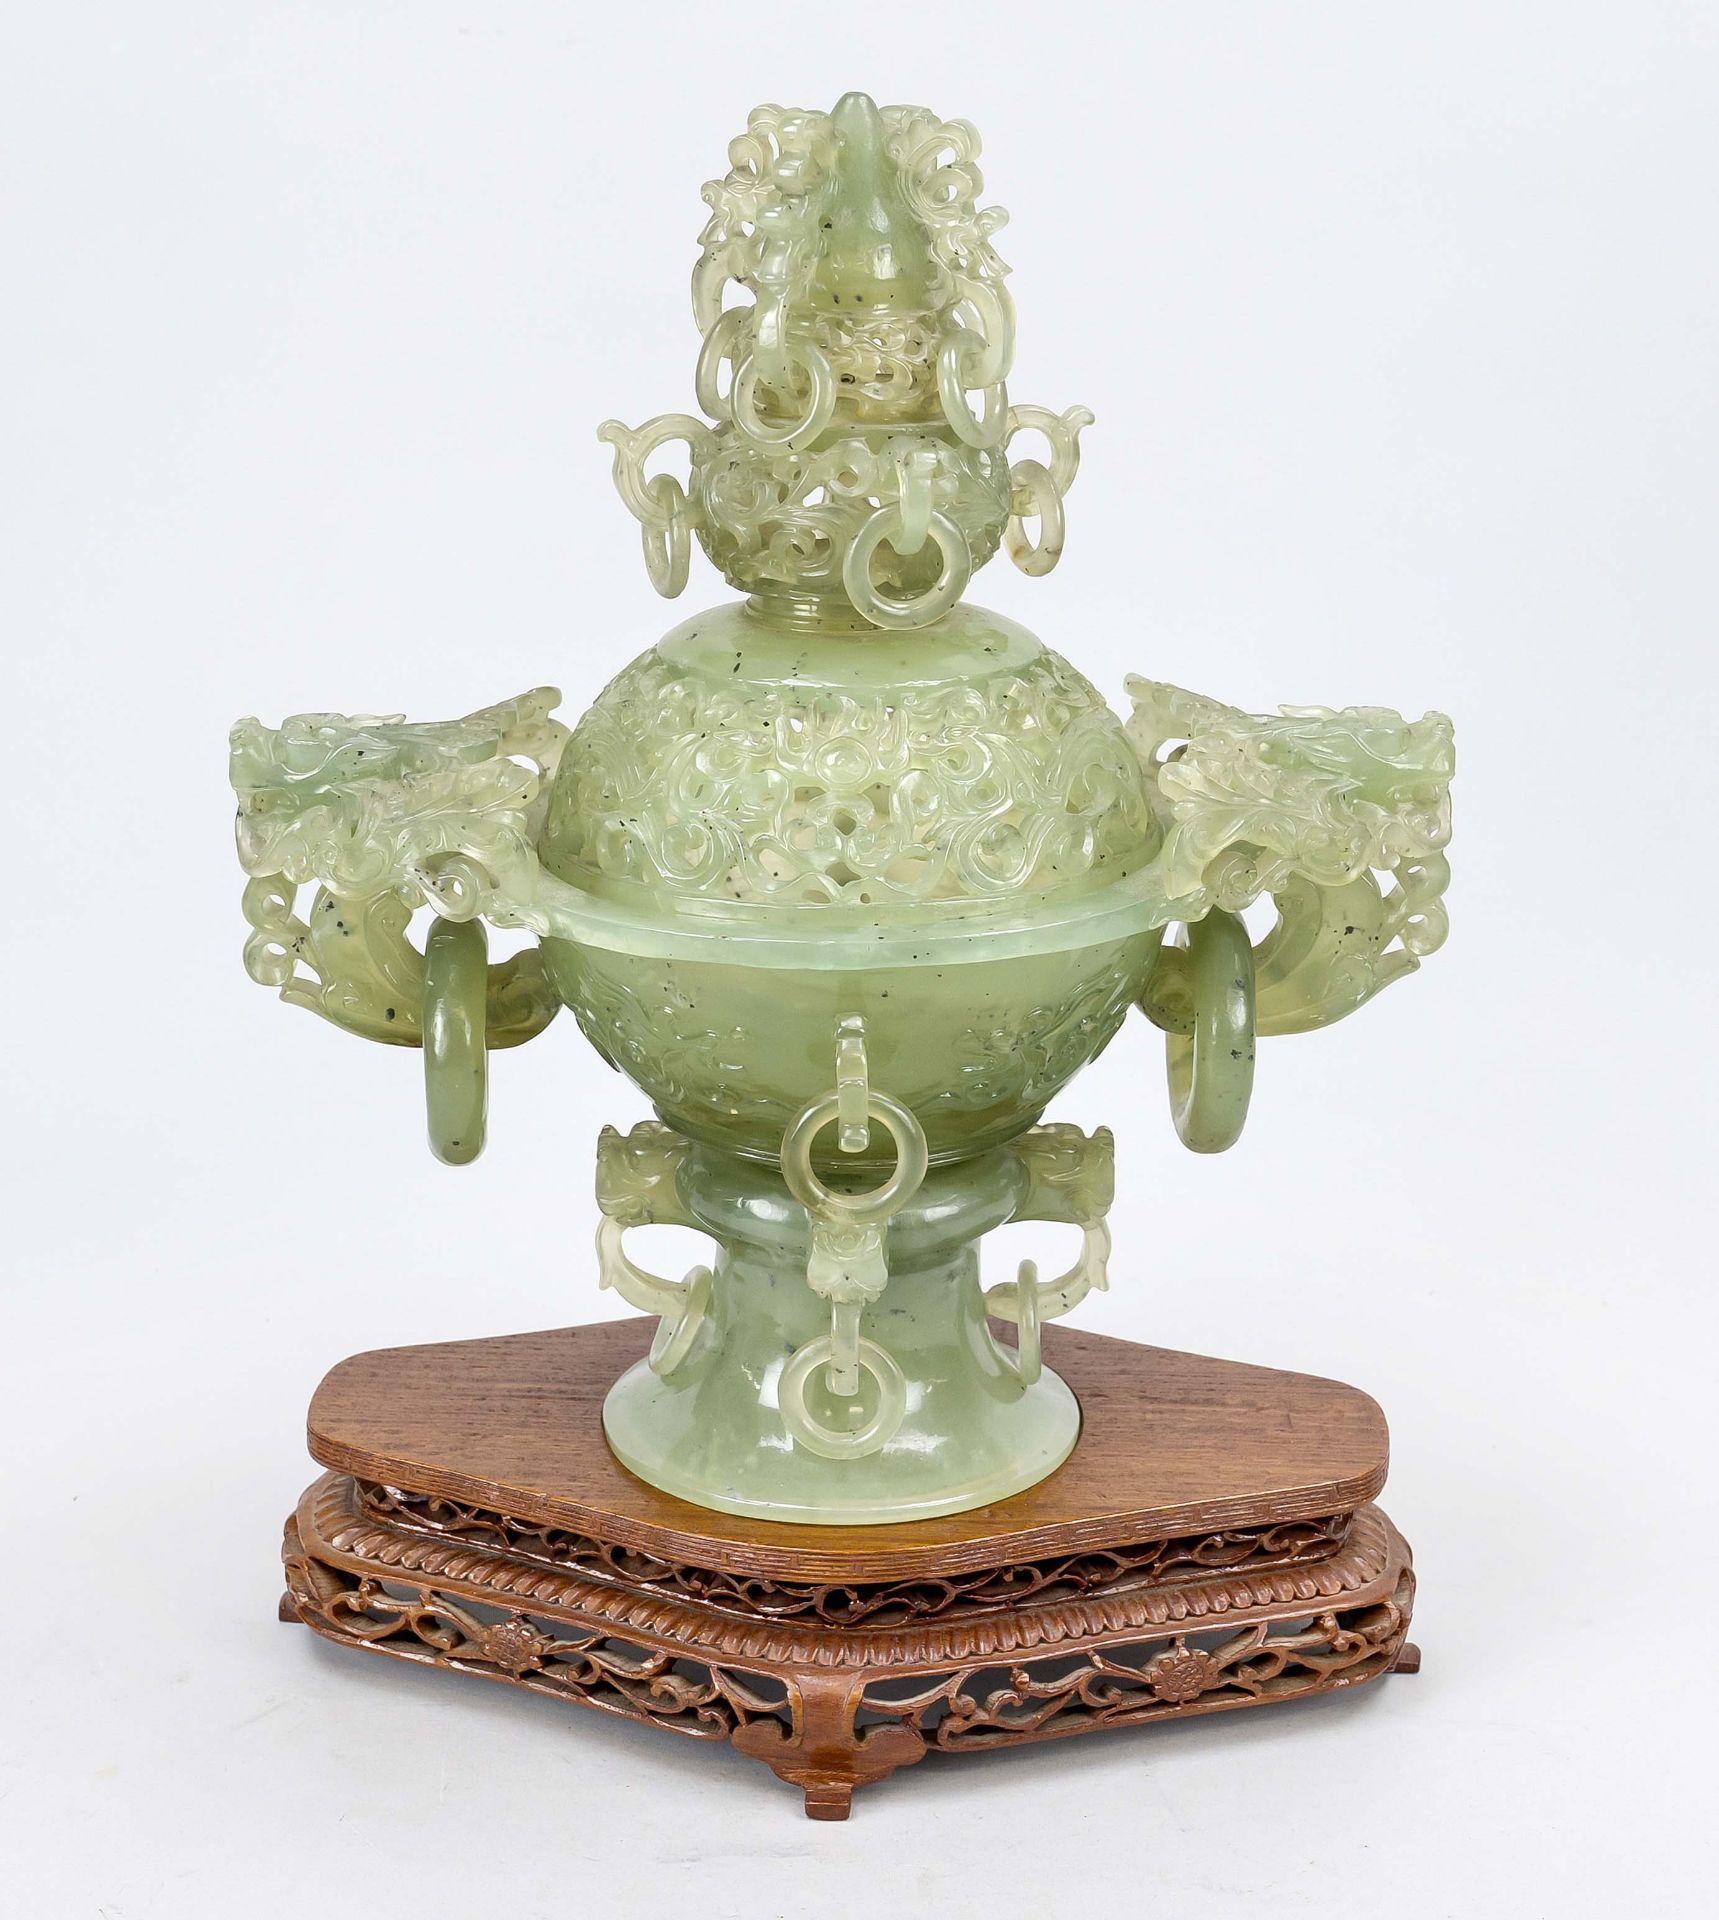 Large censer, China 20th century, celadon-colored jade? Consisting of 2 open-worked parts. Placed on